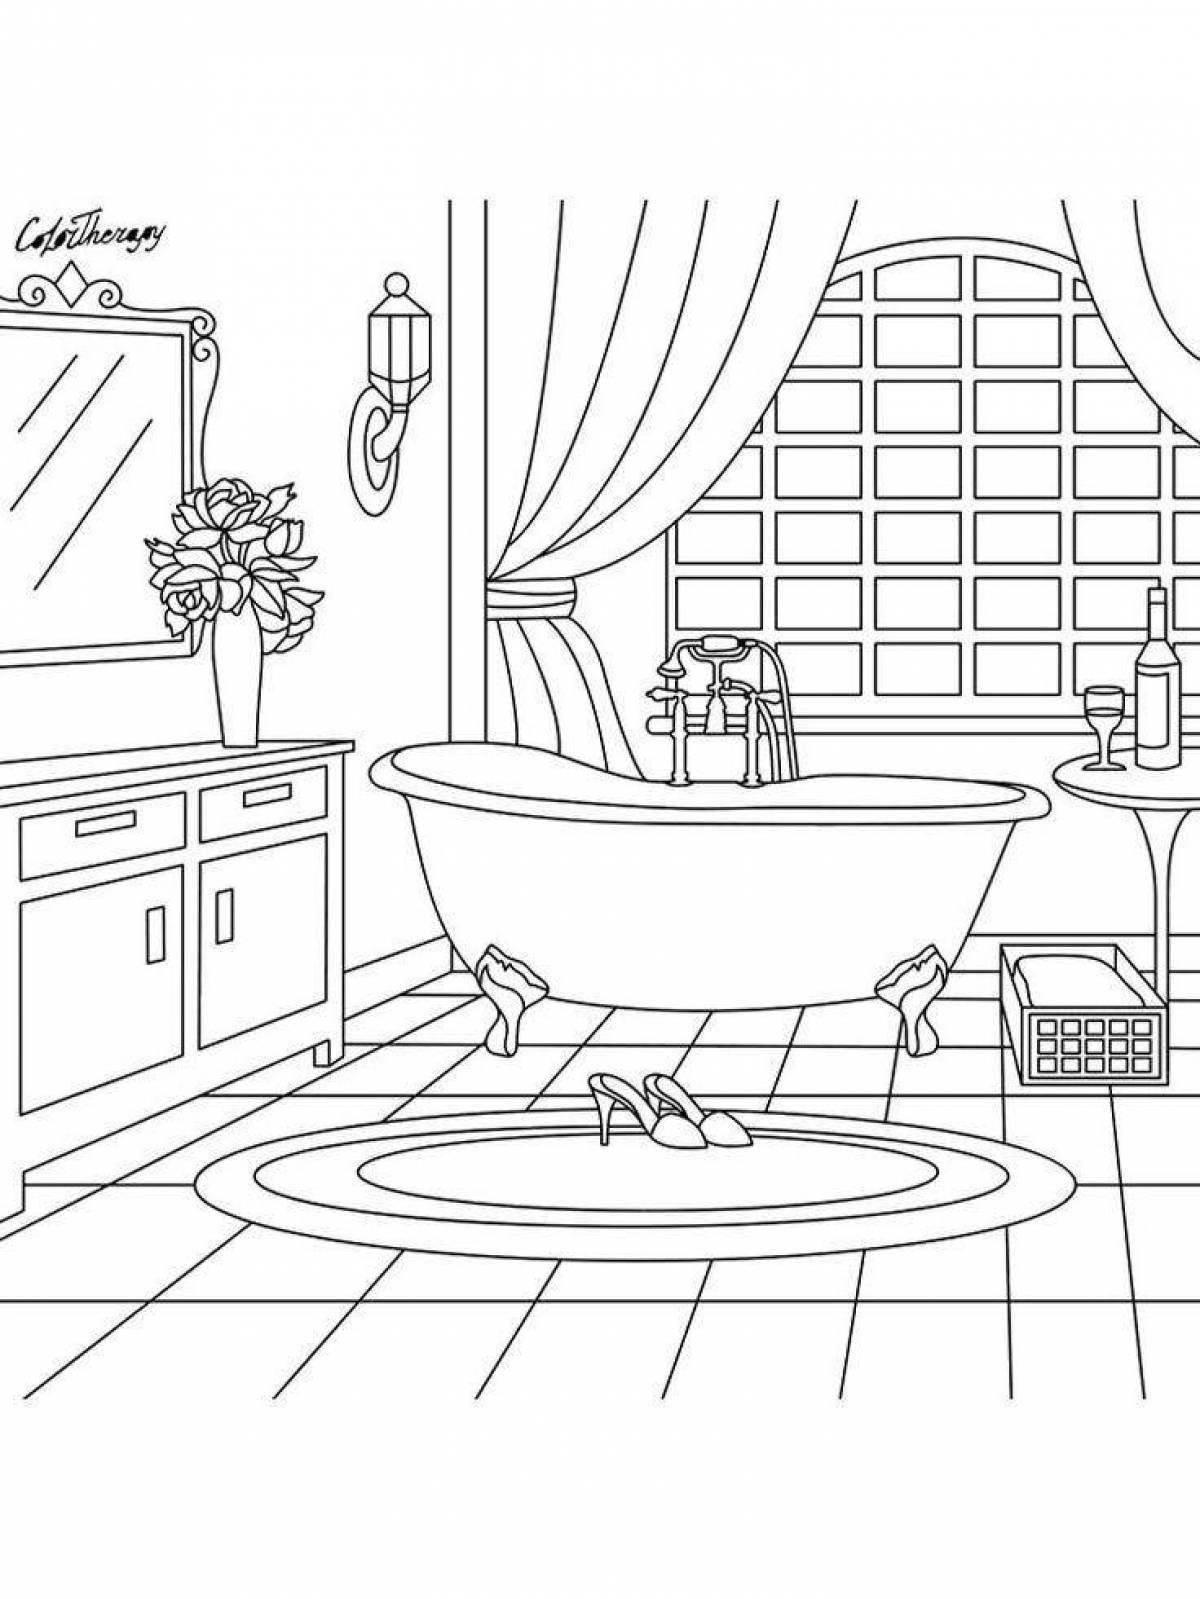 Intricate bathroom coloring page